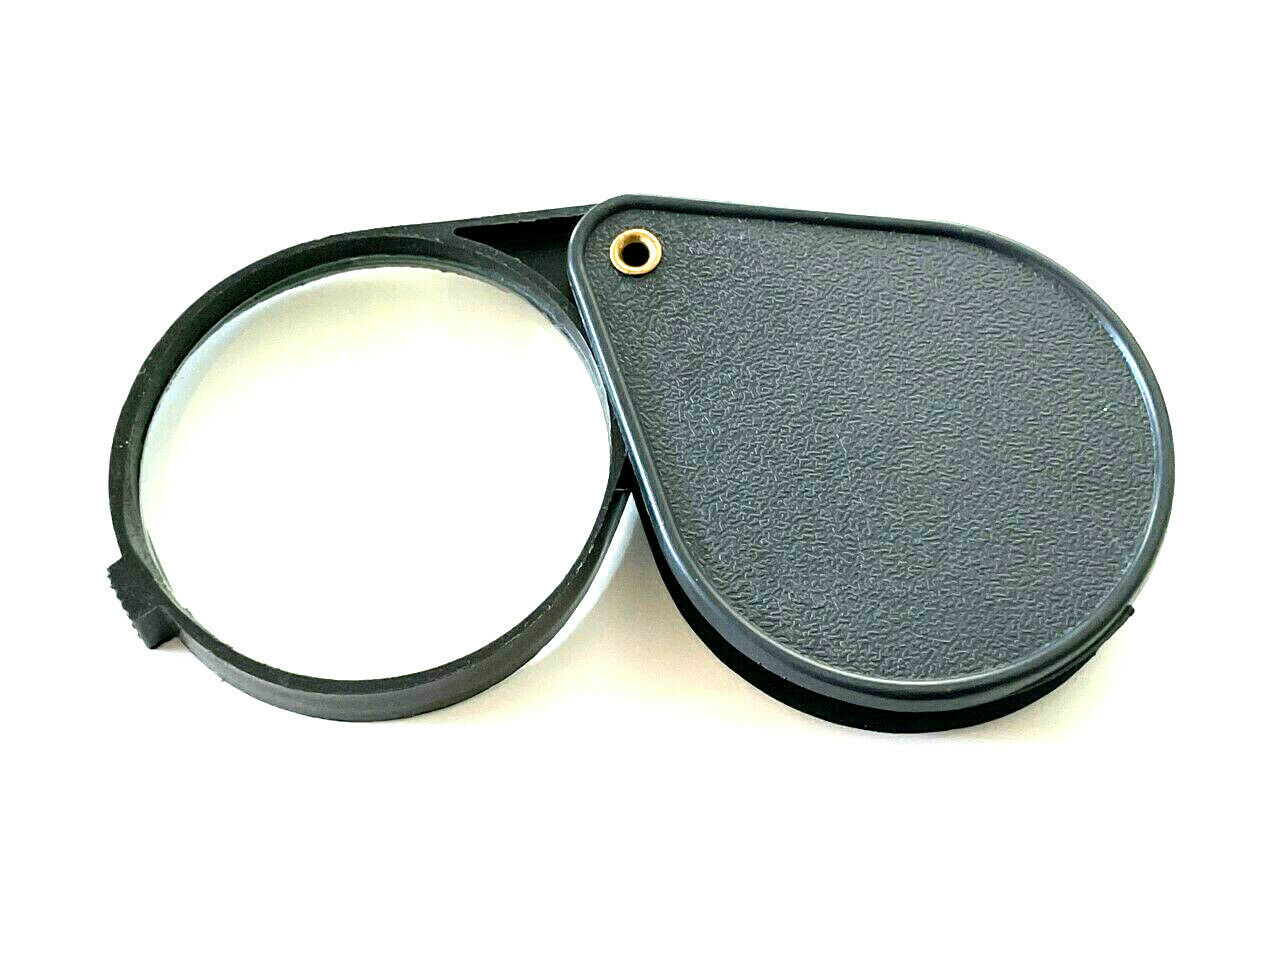 R 5X Glass Lens Pocket Magnifier with Leather Pouch Folding Magnifying Tool SODIAL